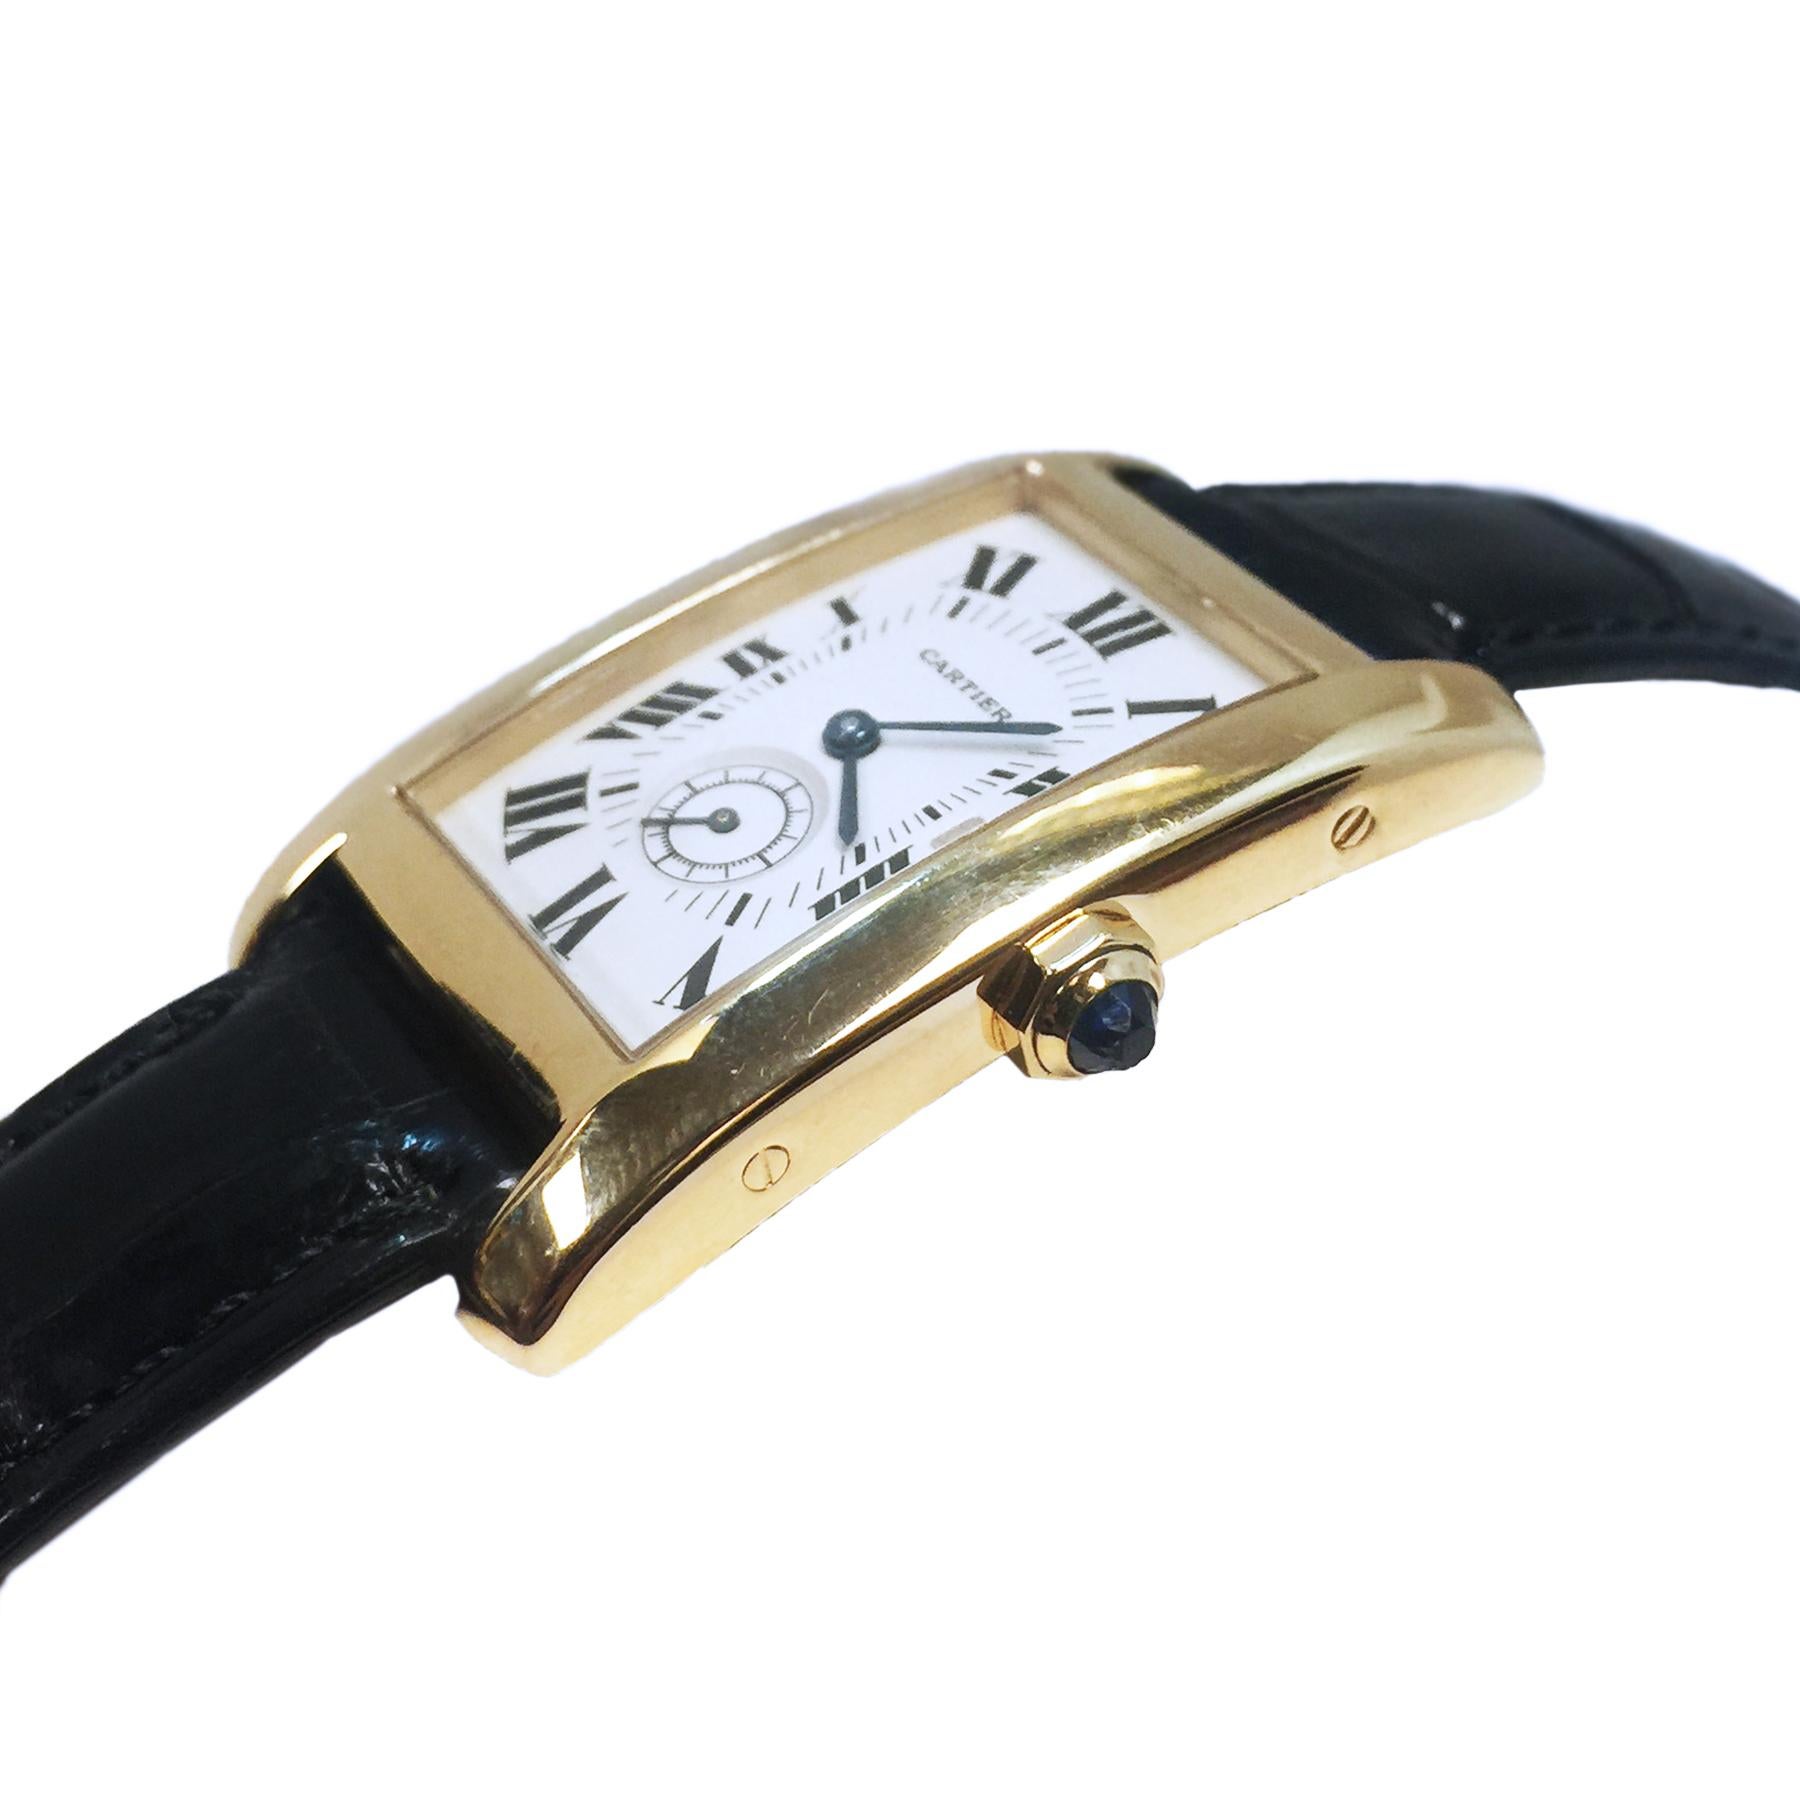 Circa 2000 Cartier Tank American Wrist Watch 41 X 24 MM 18K Yellow Gold Water resistant Case, Quartz movement, white dial with Black Roman numerals and a sub seconds dial, scratch resistant crystal and a Sapphire crown. Black Cartier Alligator Strap